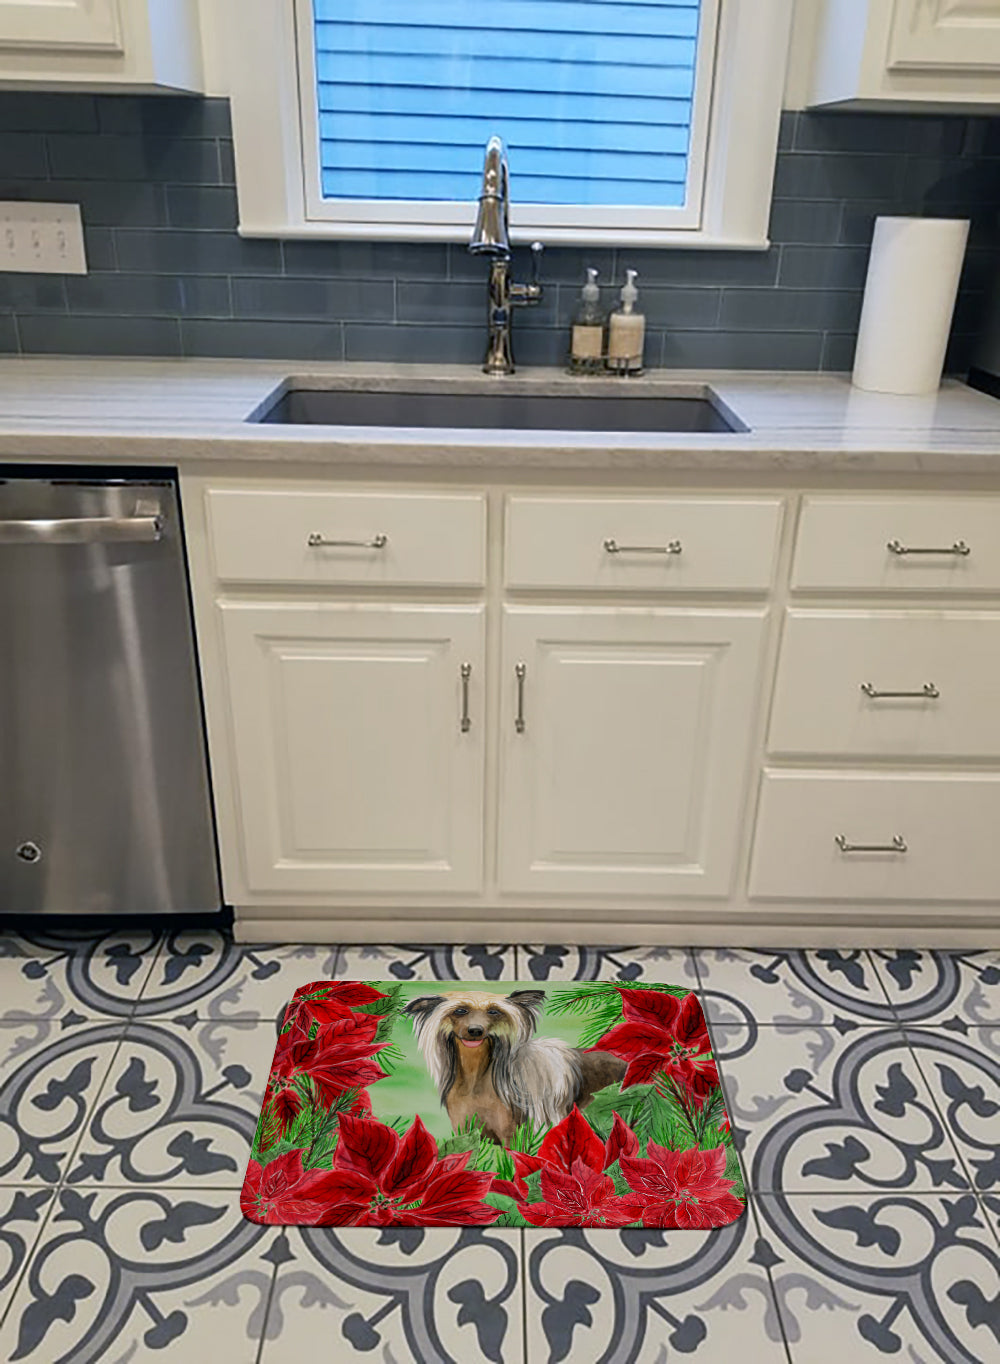 Chinese Crested Poinsettas Machine Washable Memory Foam Mat CK1307RUG - the-store.com